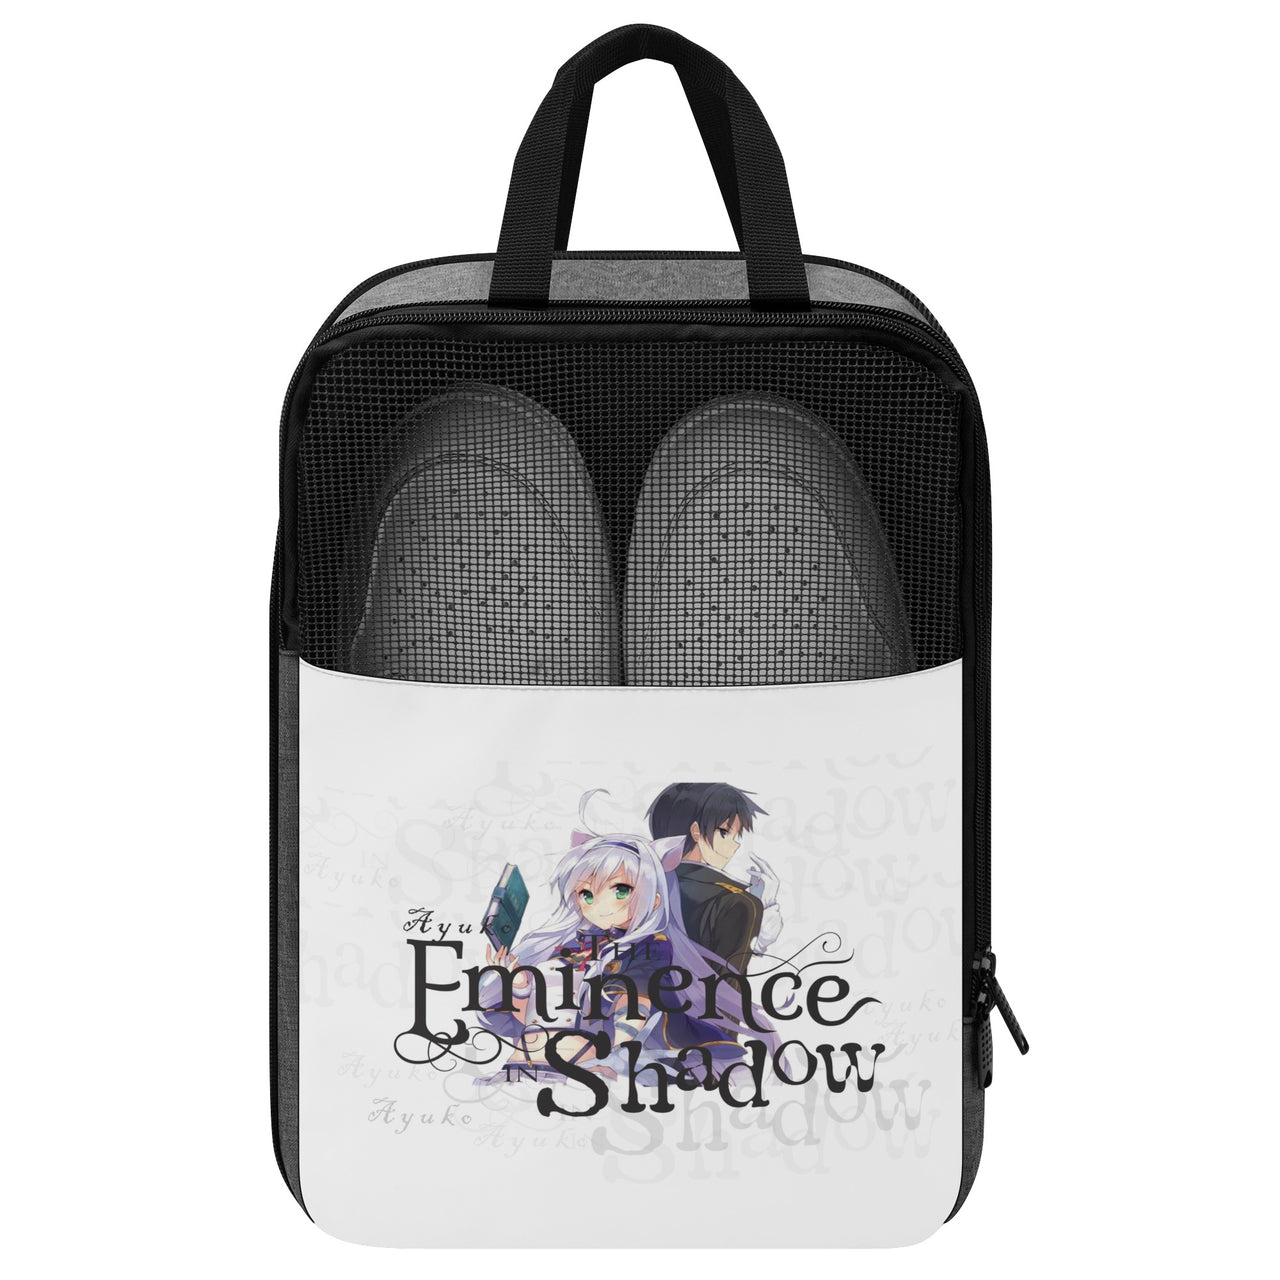 The Eminence in Shadow Anime Shoe Bag